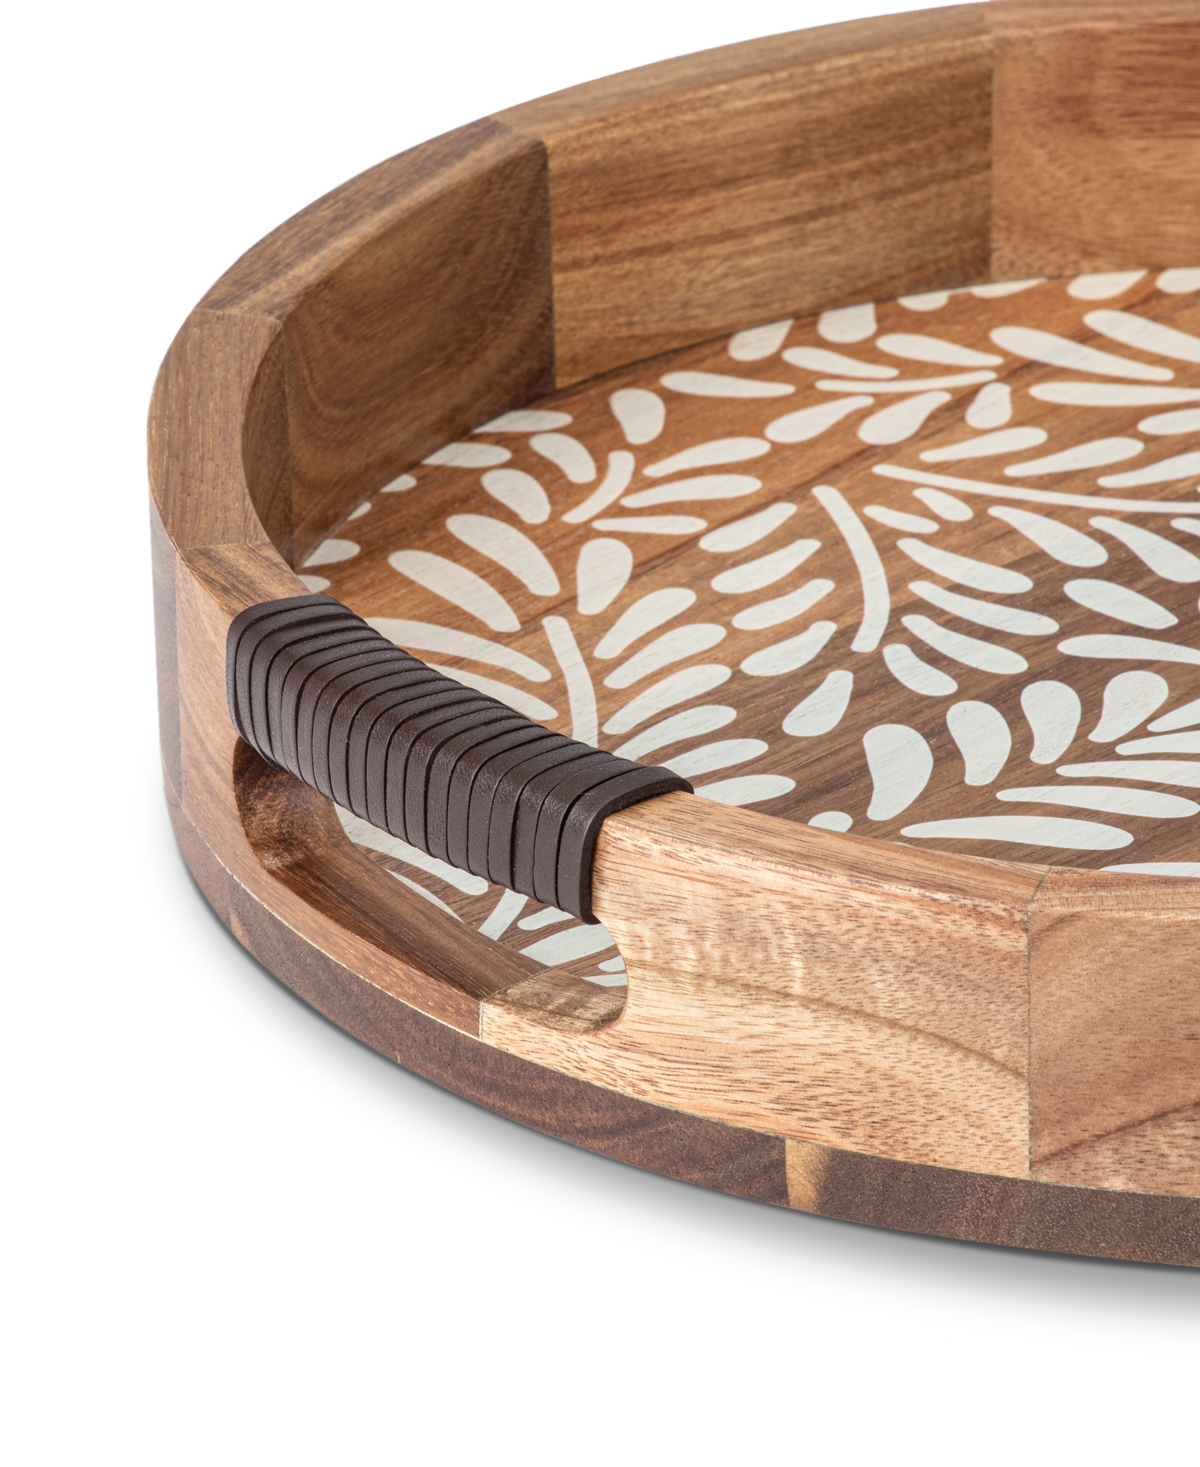 Shop Thirstystone Round Acacia Wood Tray In Brown